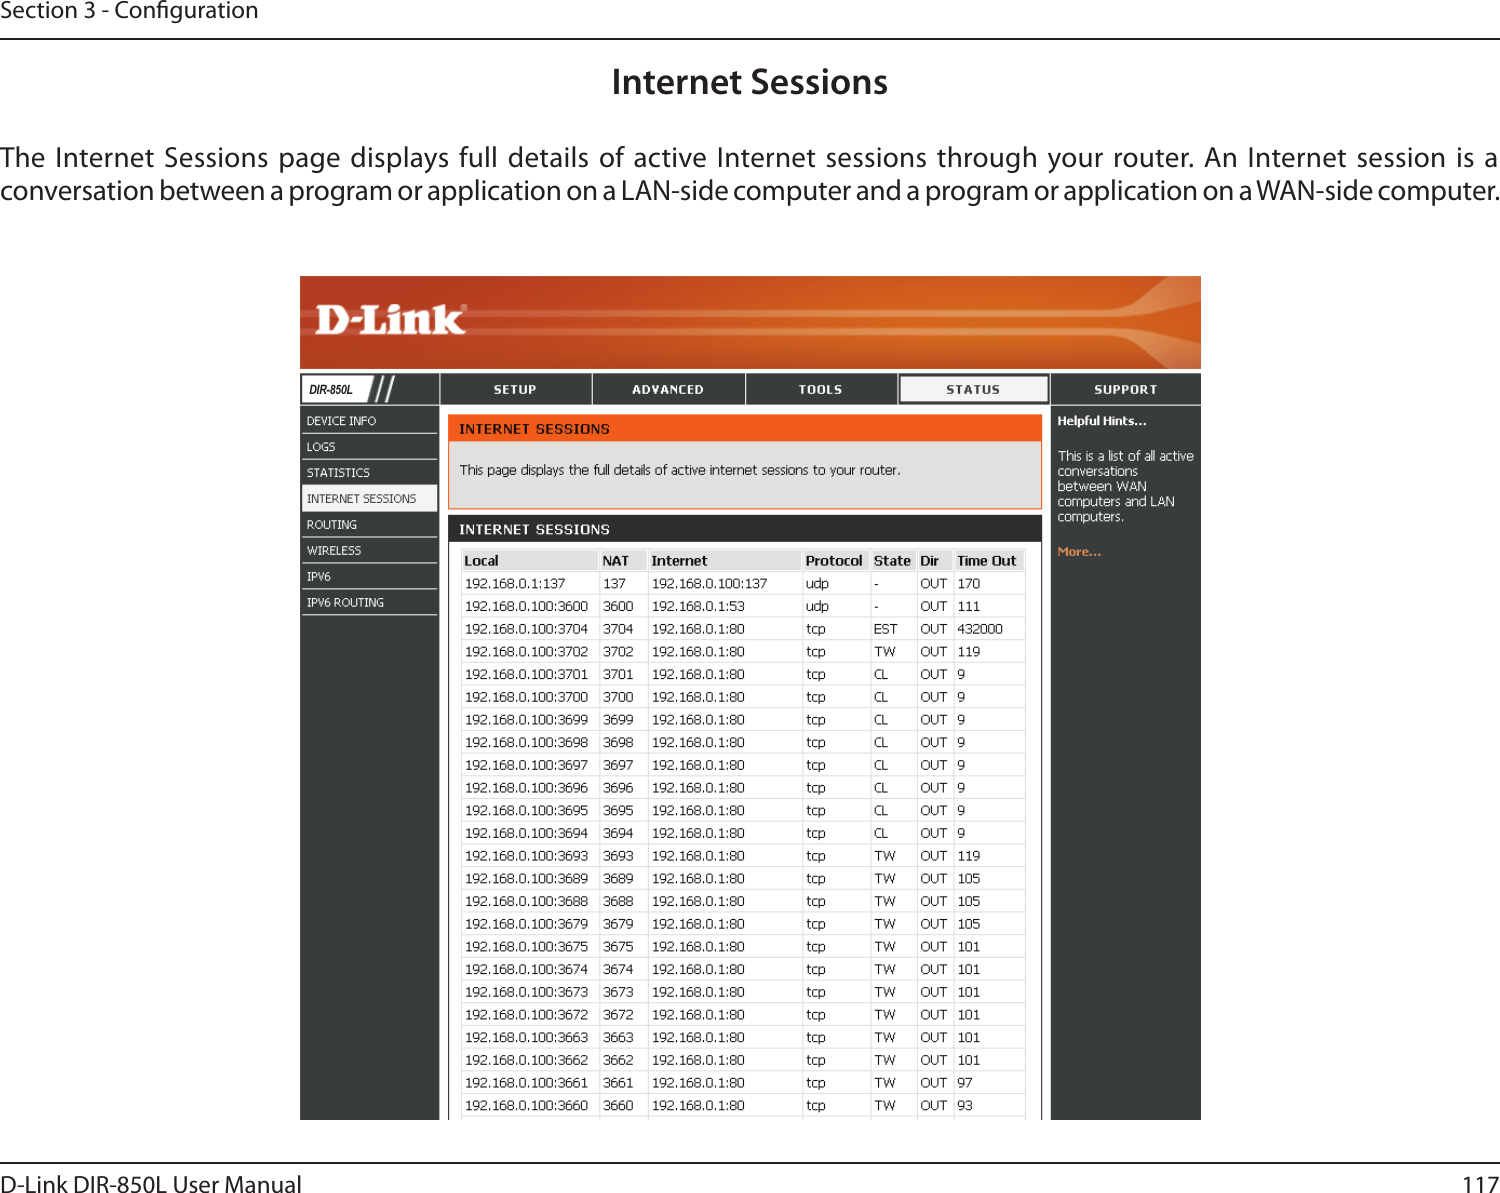 117D-Link DIR-850L User ManualSection 3 - CongurationInternet SessionsThe Internet Sessions page displays full  details  of  active Internet sessions through your router.  An  Internet session is a conversation between a program or application on a LAN-side computer and a program or application on a WAN-side computer. DIR-850L